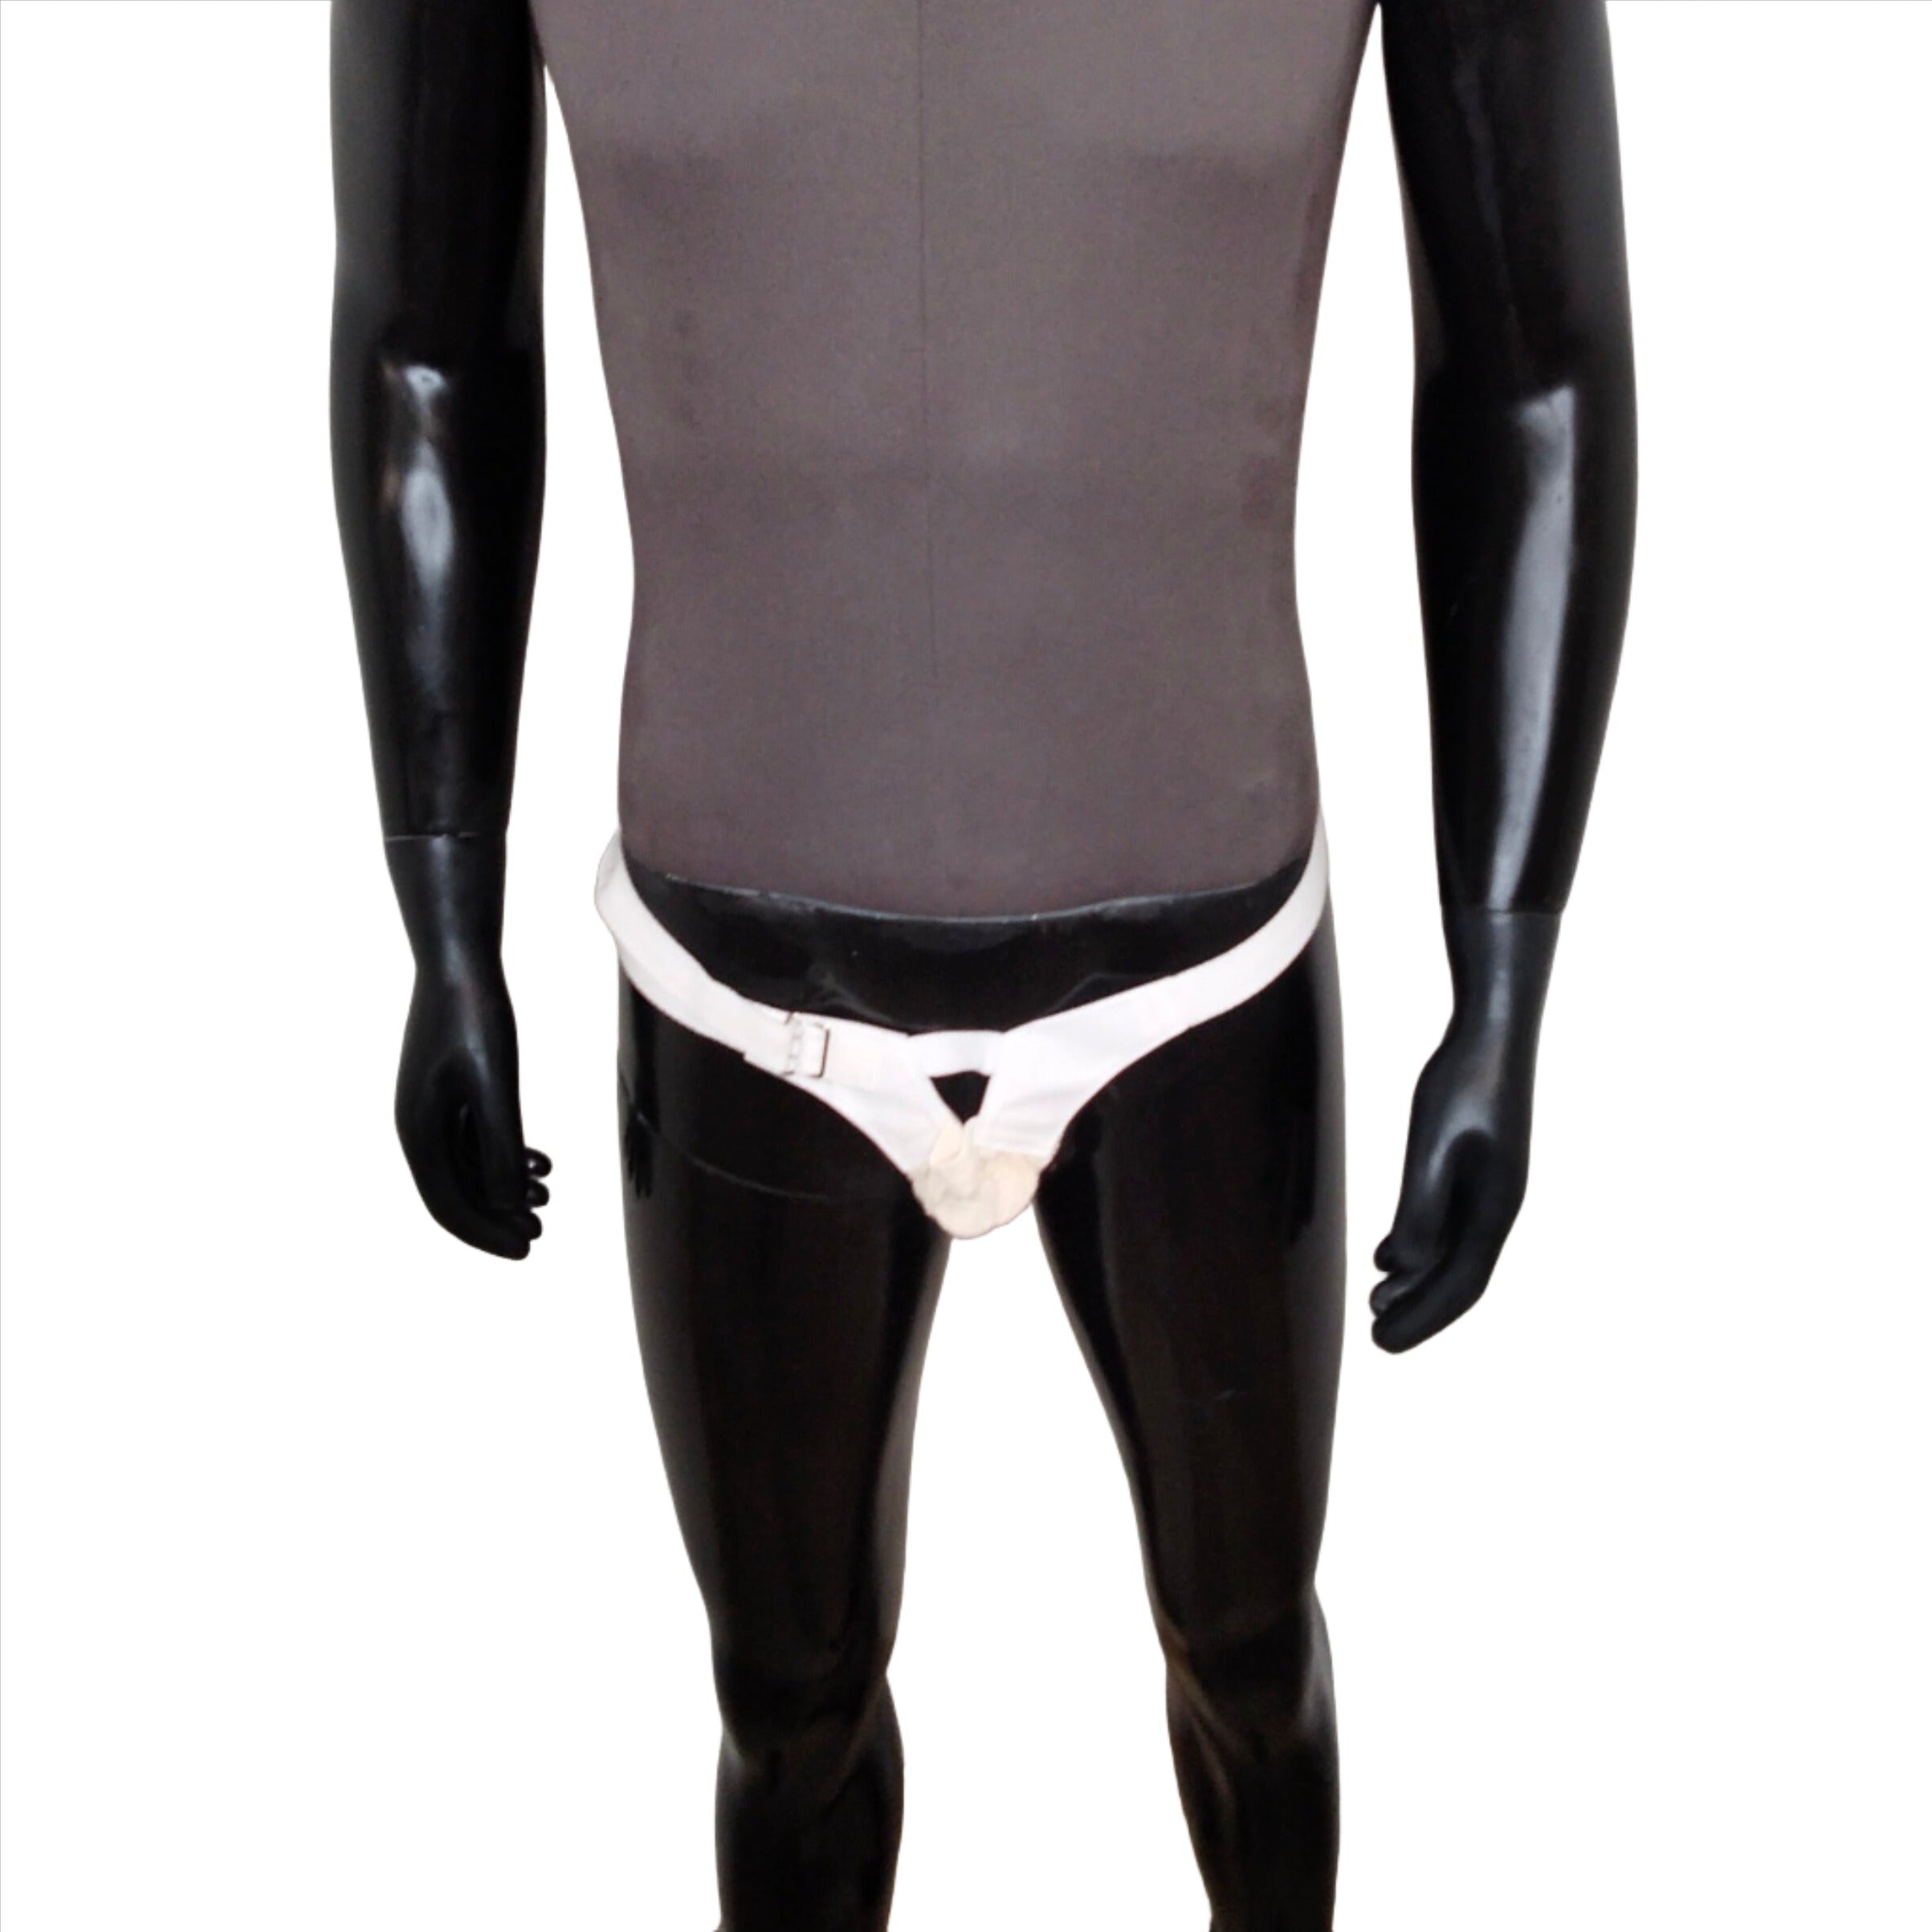 Type 2 Scrotal Support Suspensory Bandage - Discontinued Line - Limited  Stock